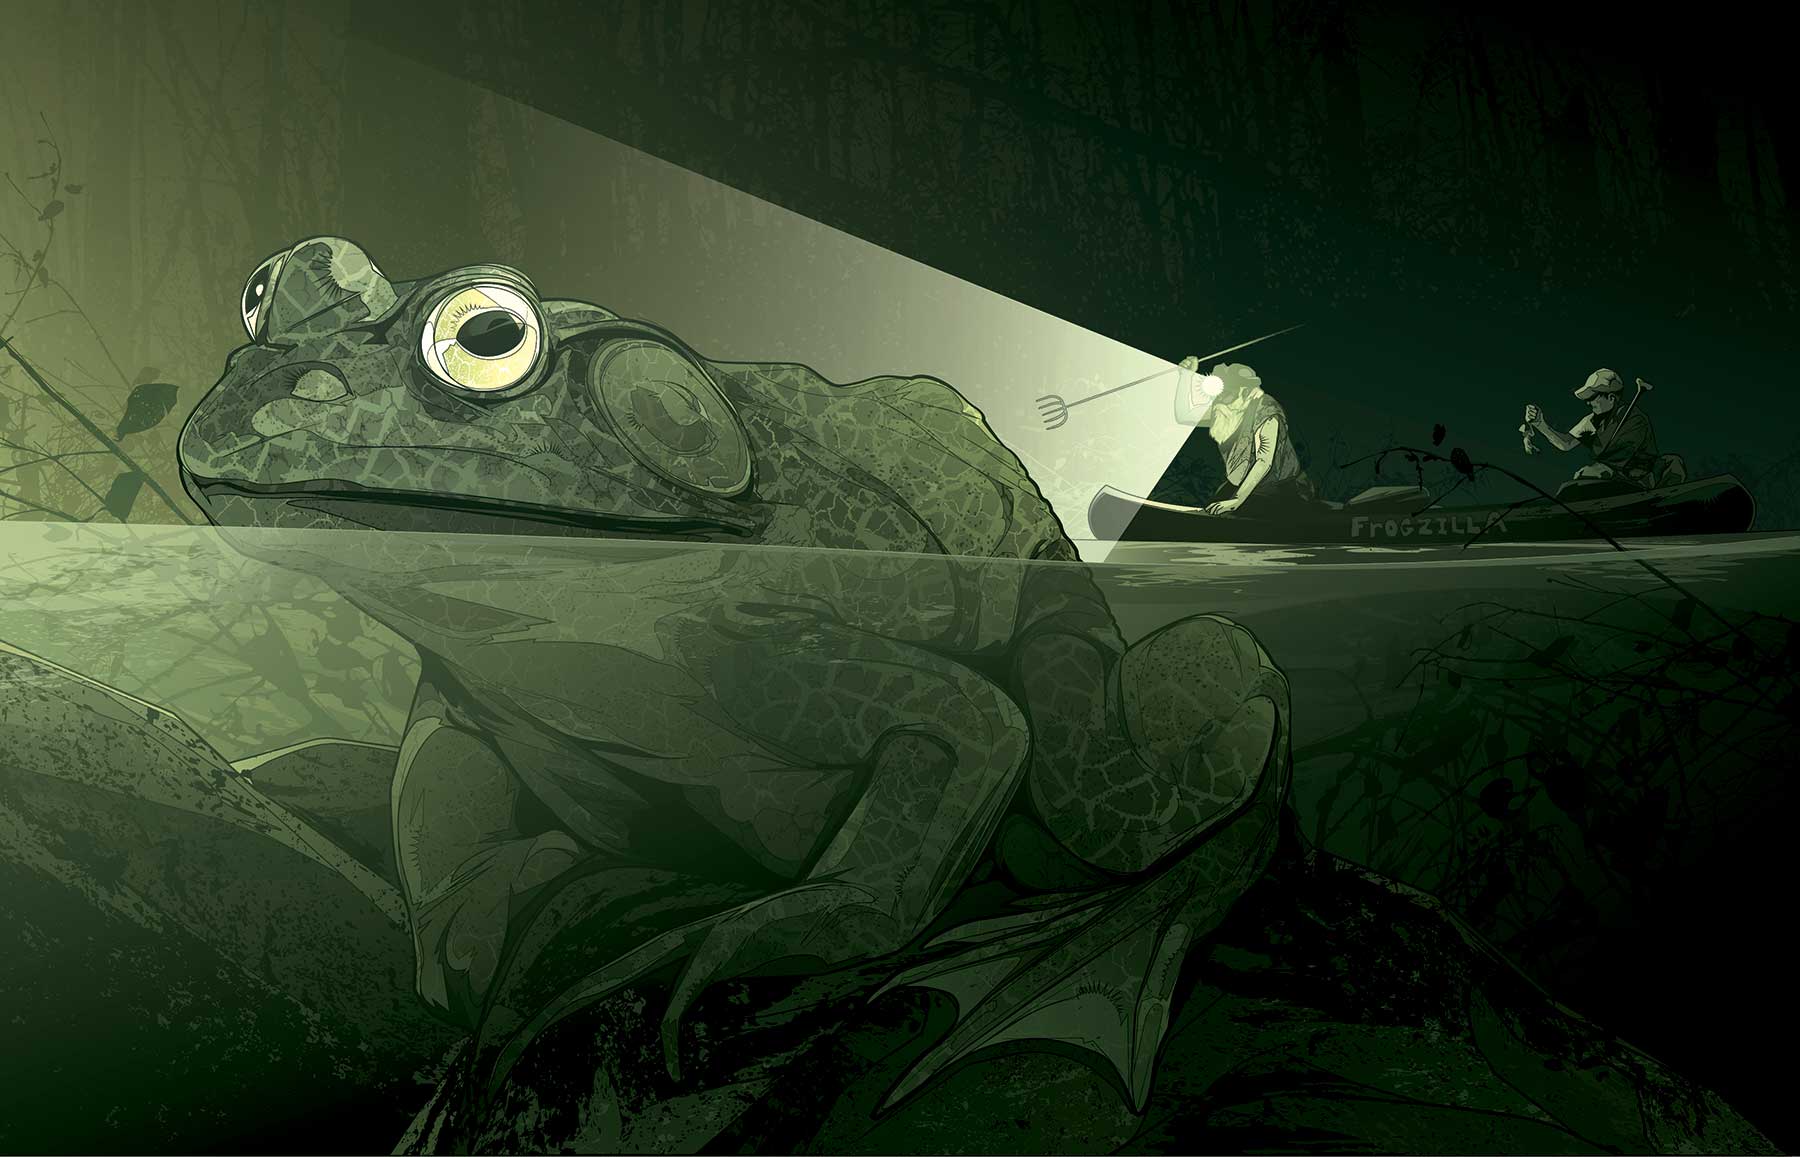 Six Expert Tips for Catching Giant Bullfrogs